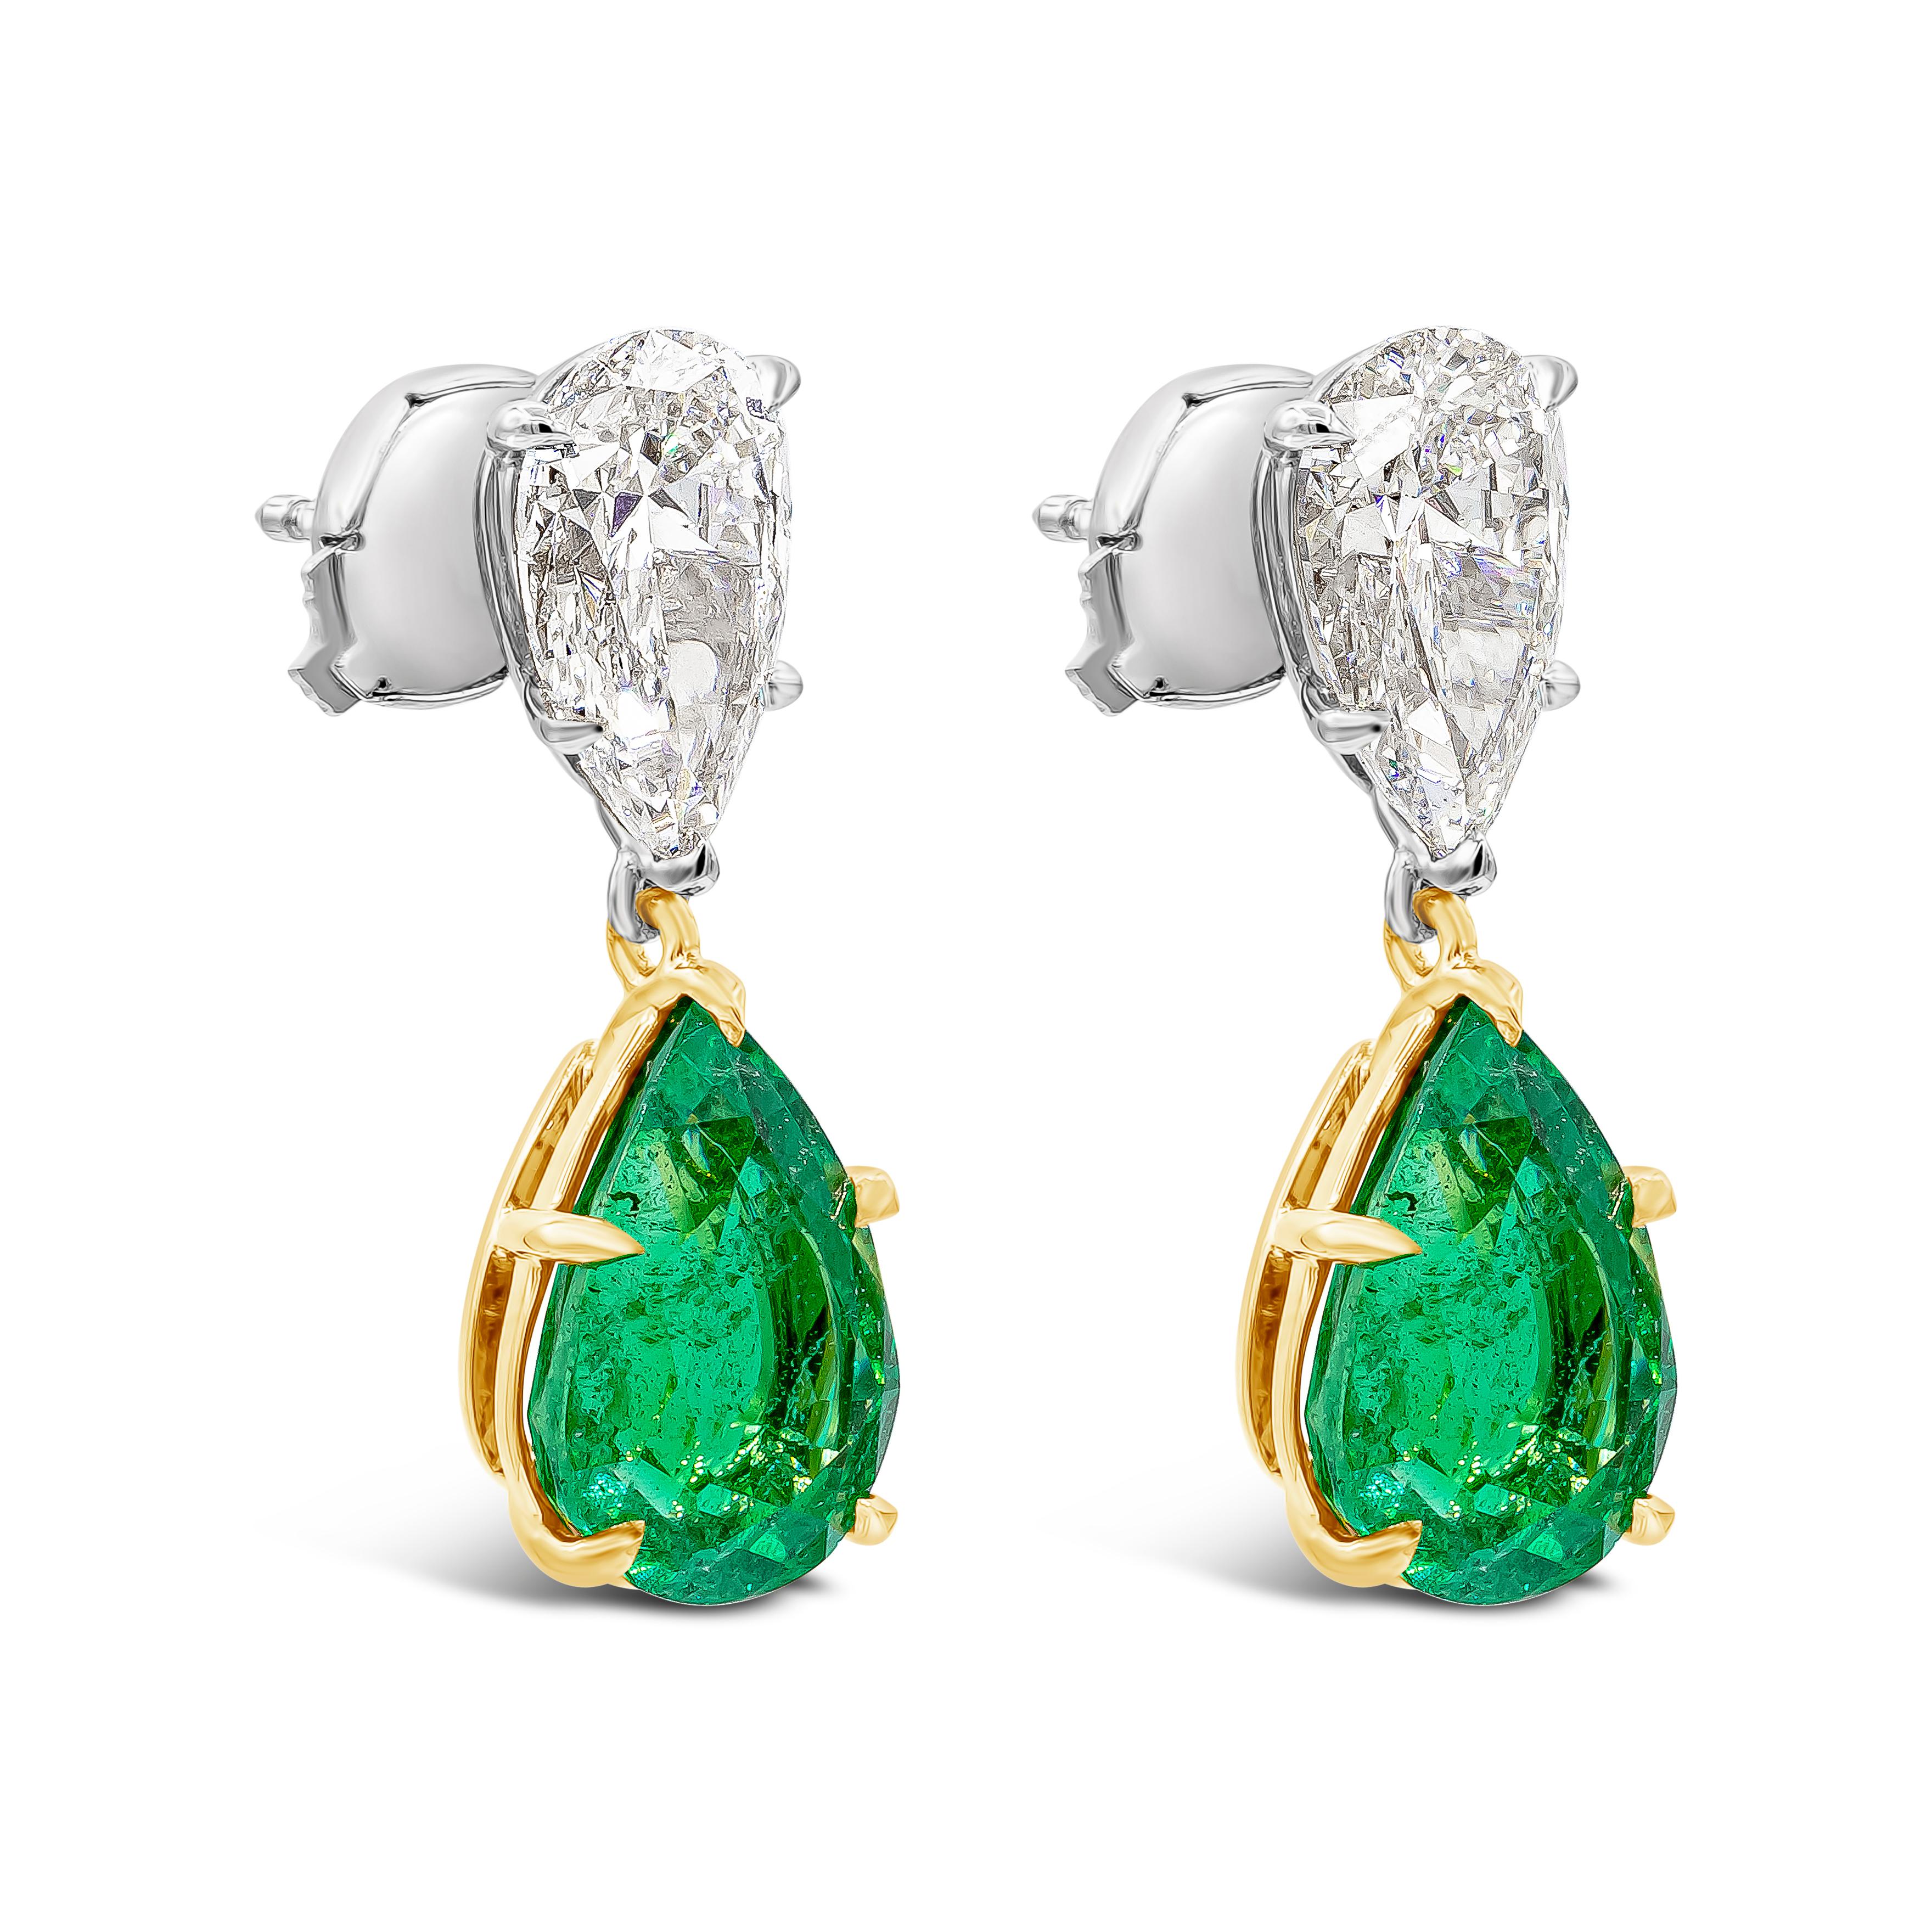 A simple yet elegant pair of earrings showcasing a vibrant pear shape green emeralds weighing 4.18 carats total, SI in clarity. Each suspended on an inverted pear shape diamond weighing 2.12 carats total, H color and SI in clarity. Made in 18K